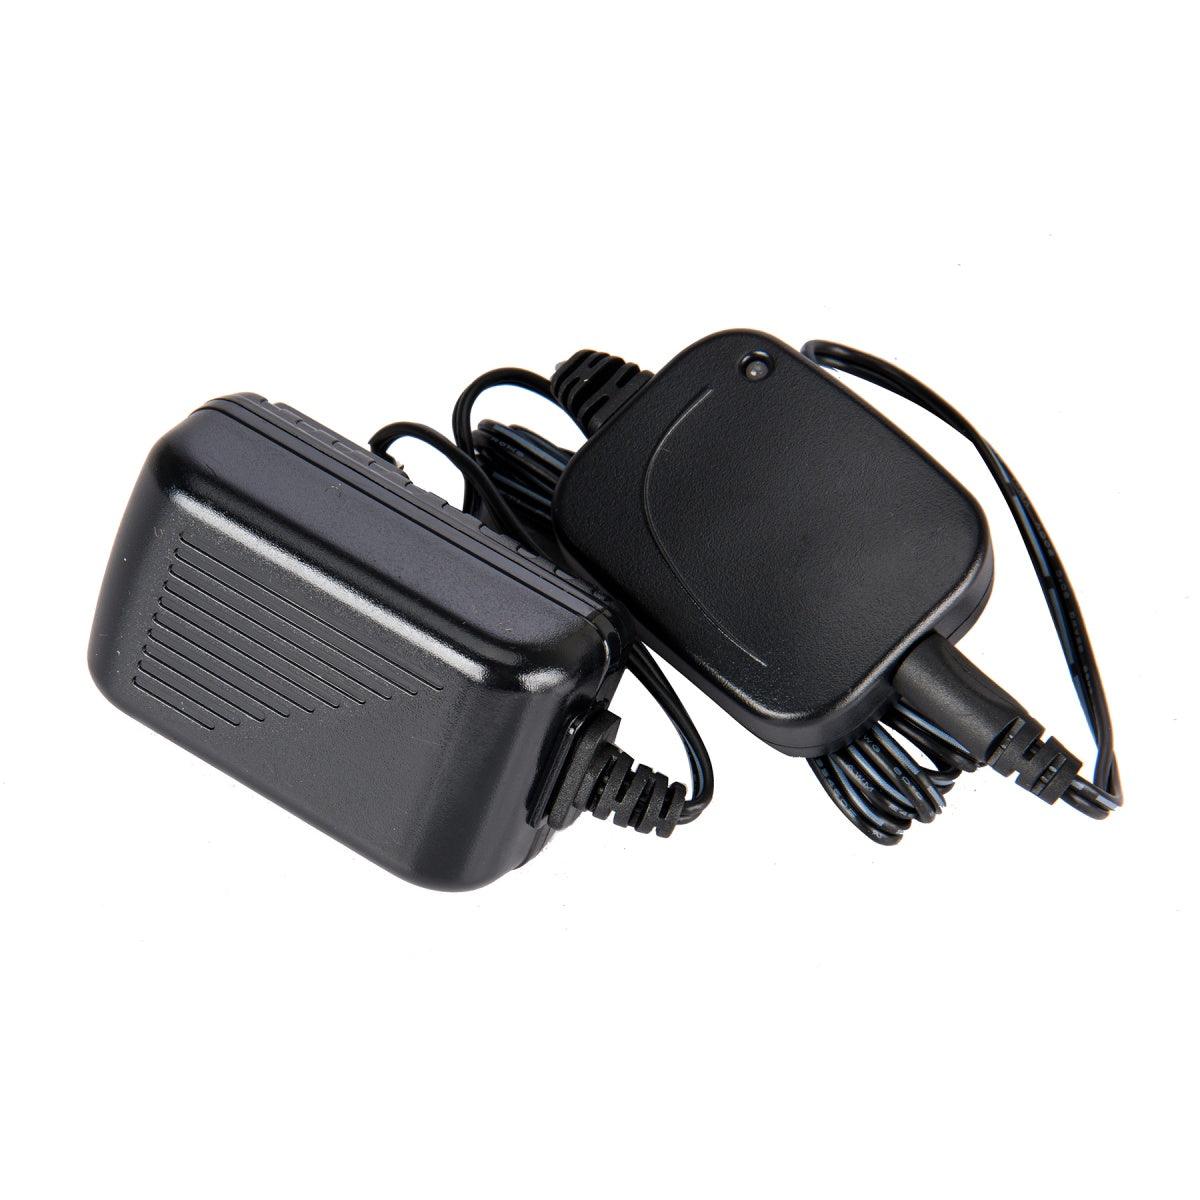 G&G ARMAMENT 16V 0.4A NIMH BATTERY CHARGER FOR AEG - NeonSales South Africa